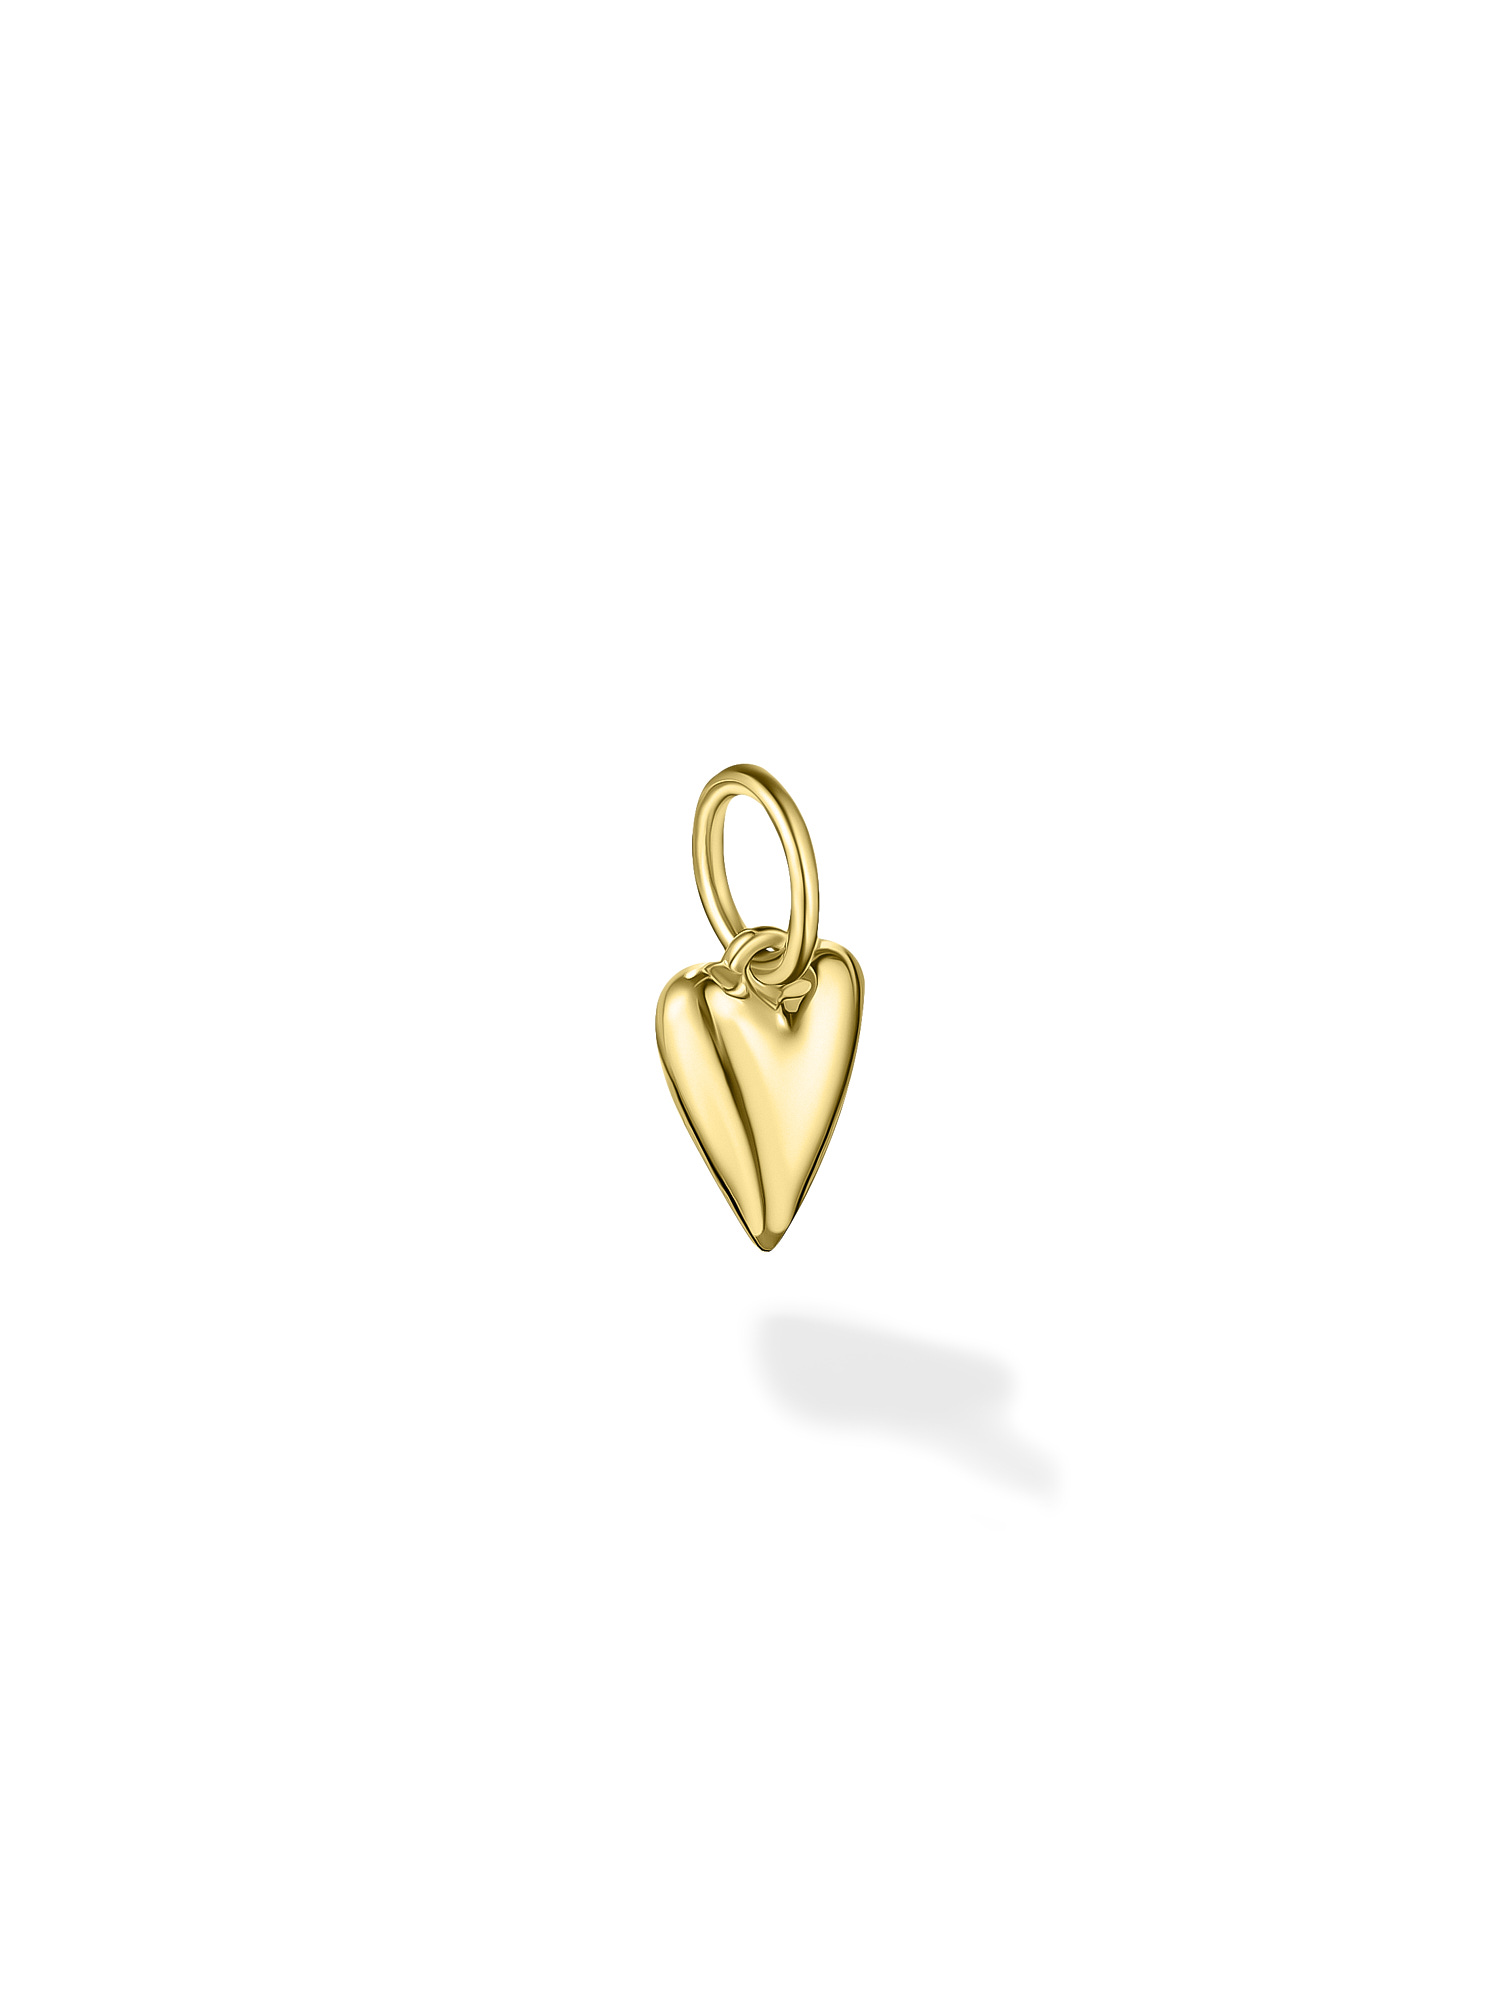 PLAY HEART TRINKET WITH GOLD PLATING  